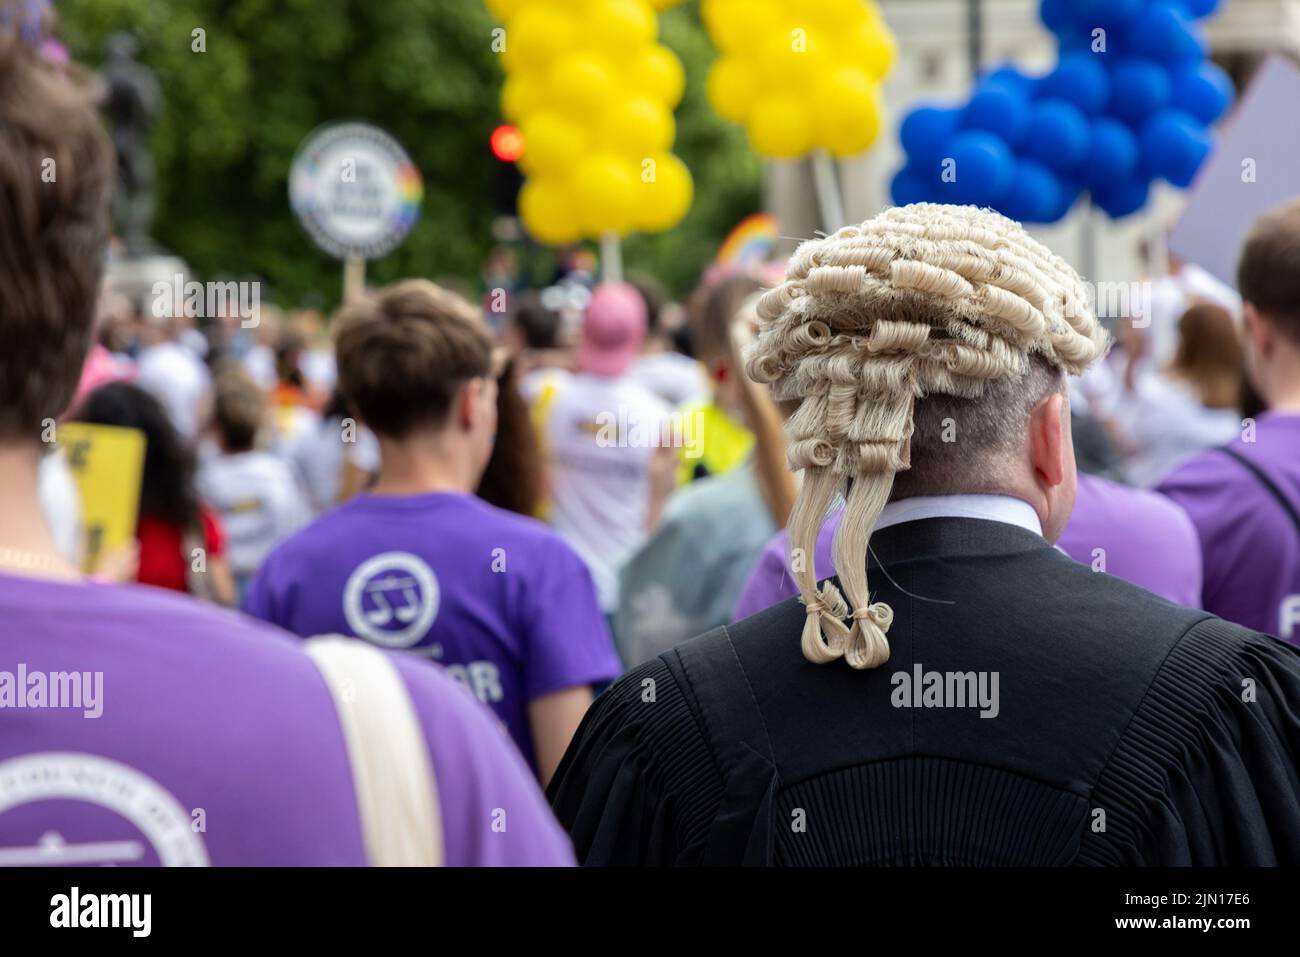 A barrister marches as part of the Legal block at  London Pride 2022, dressed in traditional gown and wig. Stock Photo